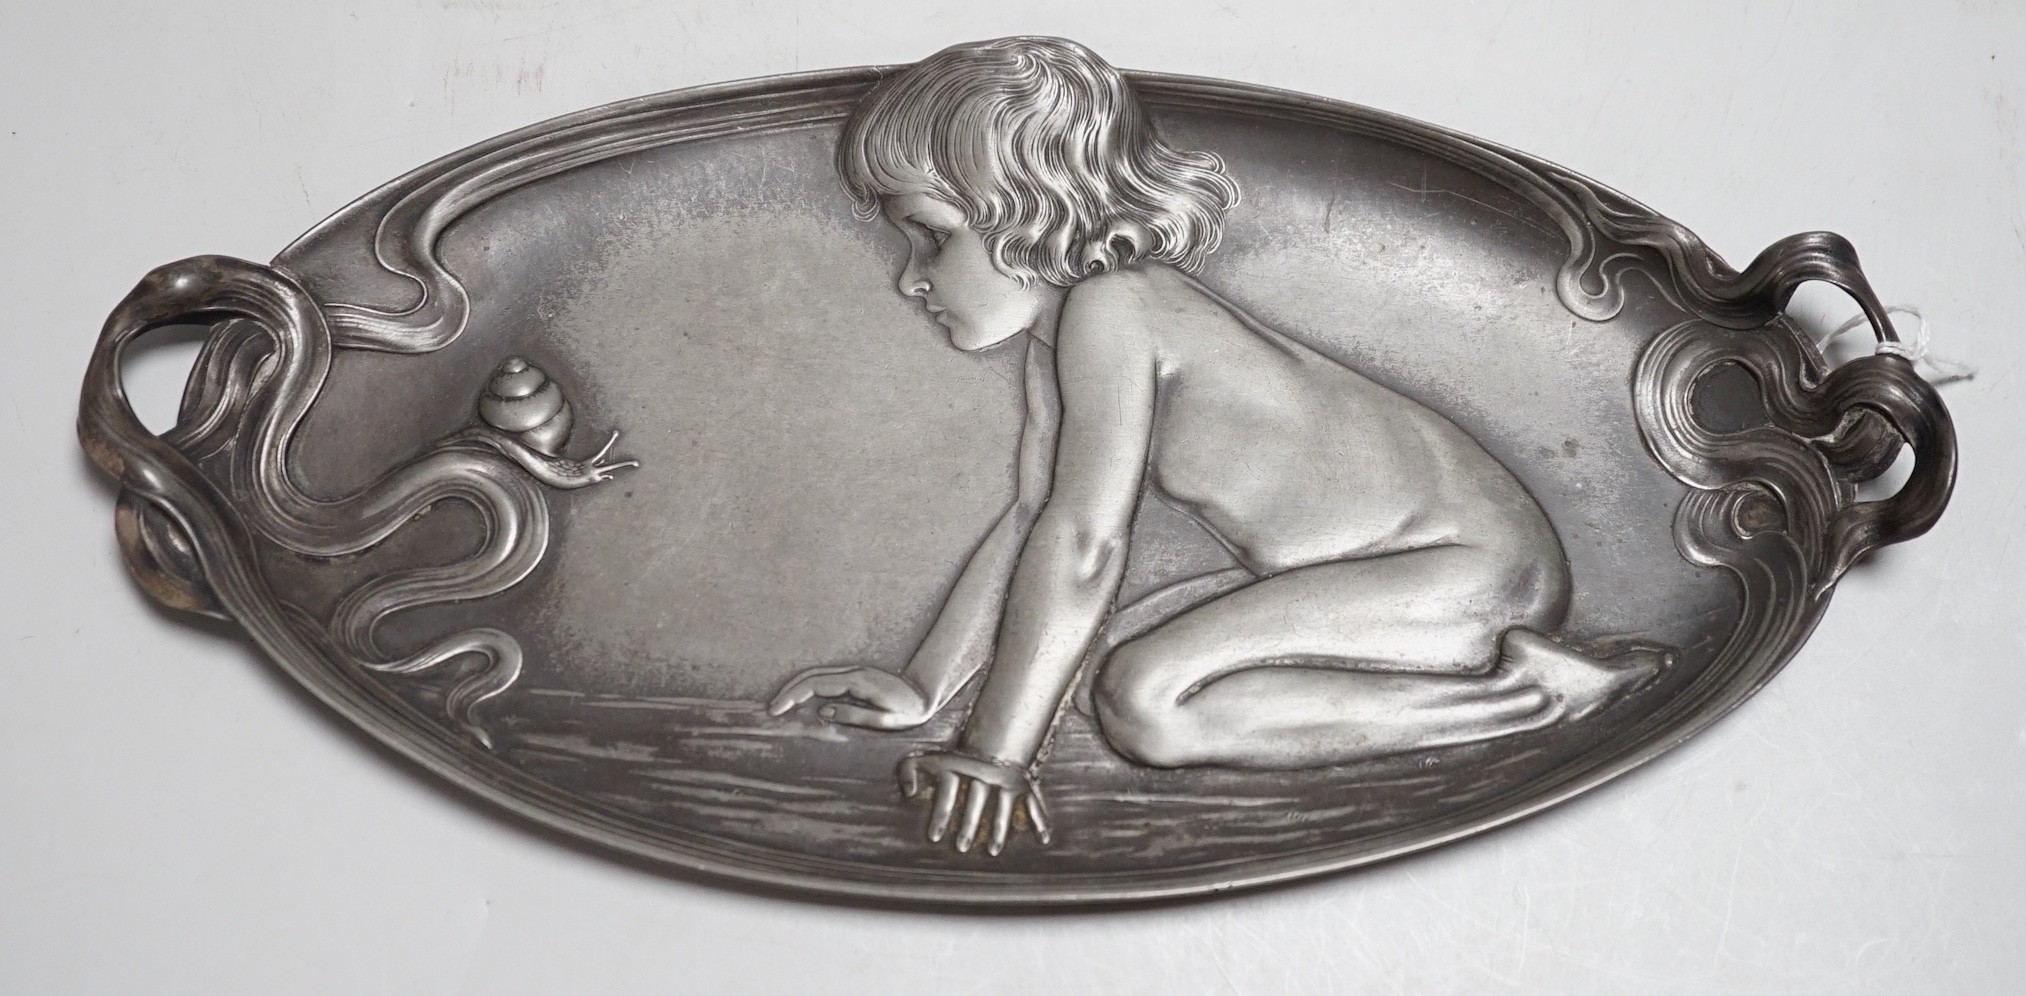 An unmarked, (possibly WMF) stamped 210 on base, an Art Nouveau pewter dish with a child admiring a snail. 27cm wide